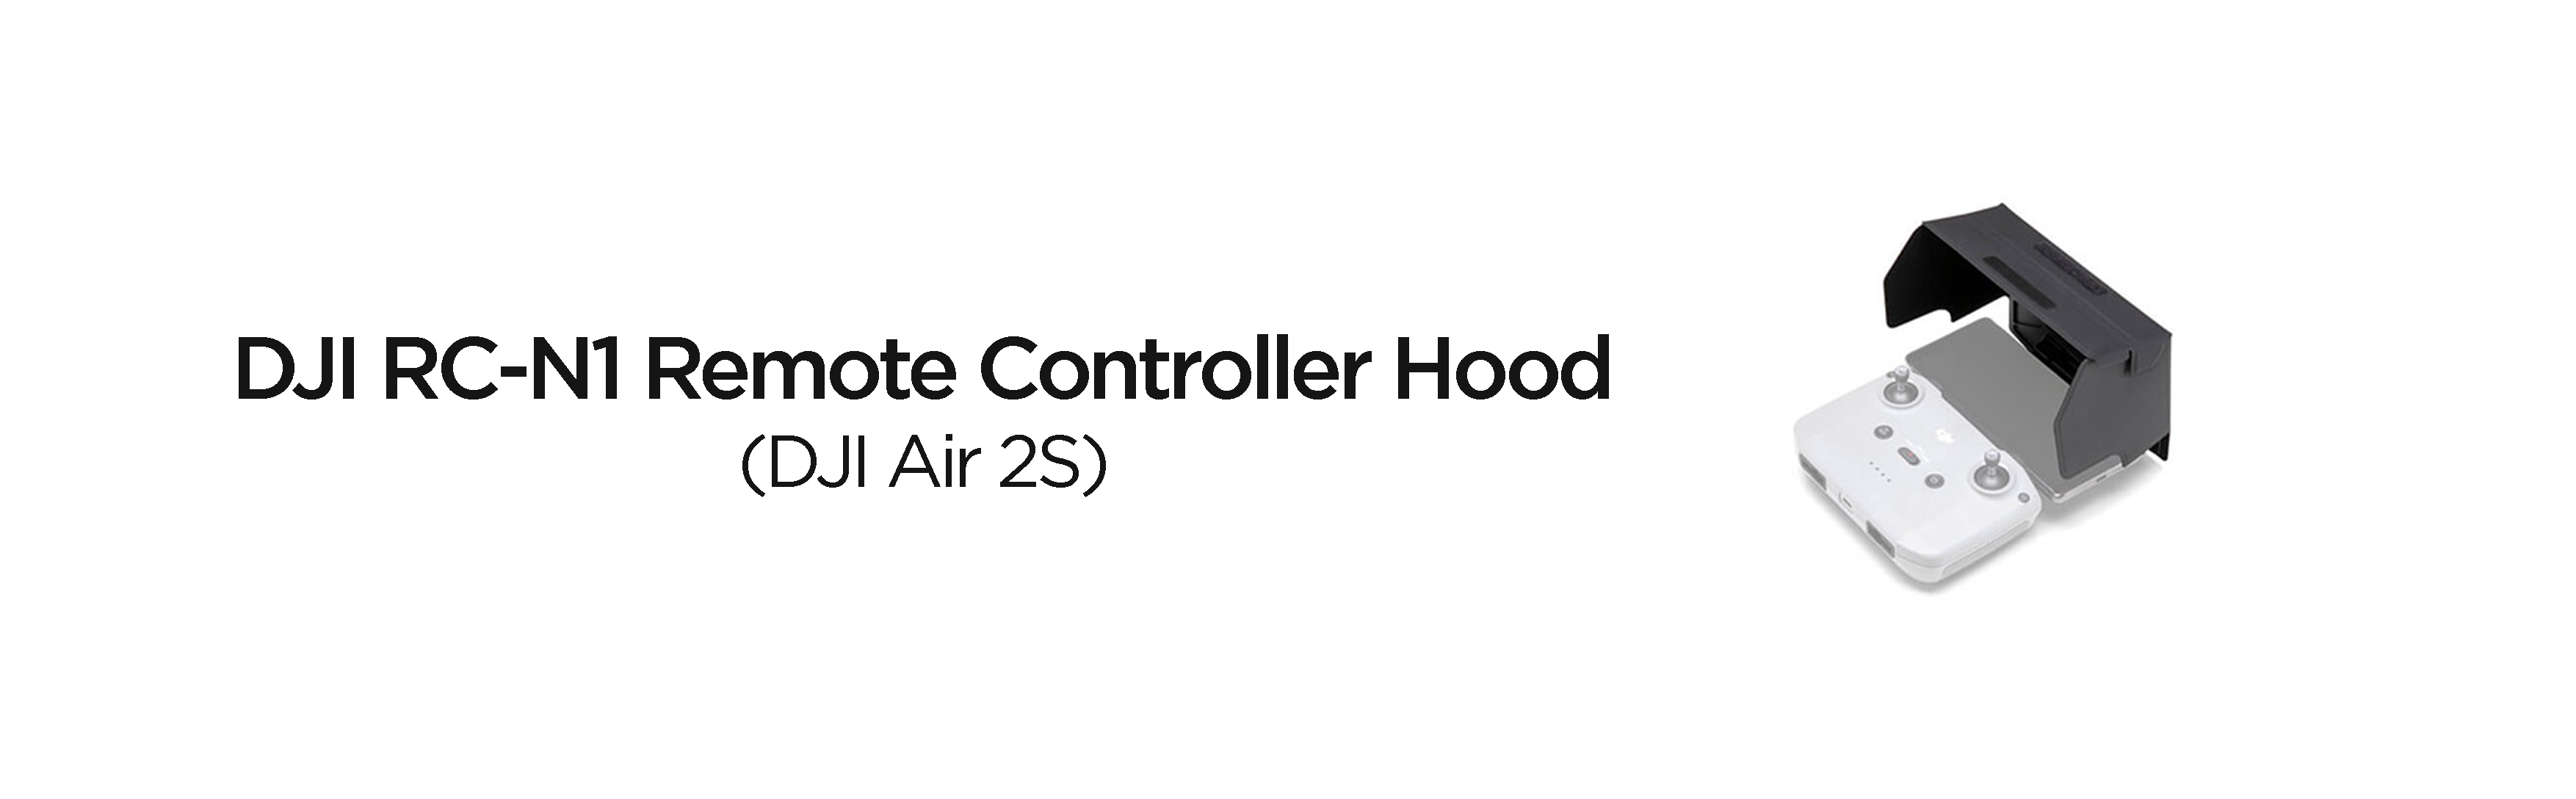 DJI RC-N1 Remote Controller Hood Must Have Accessories